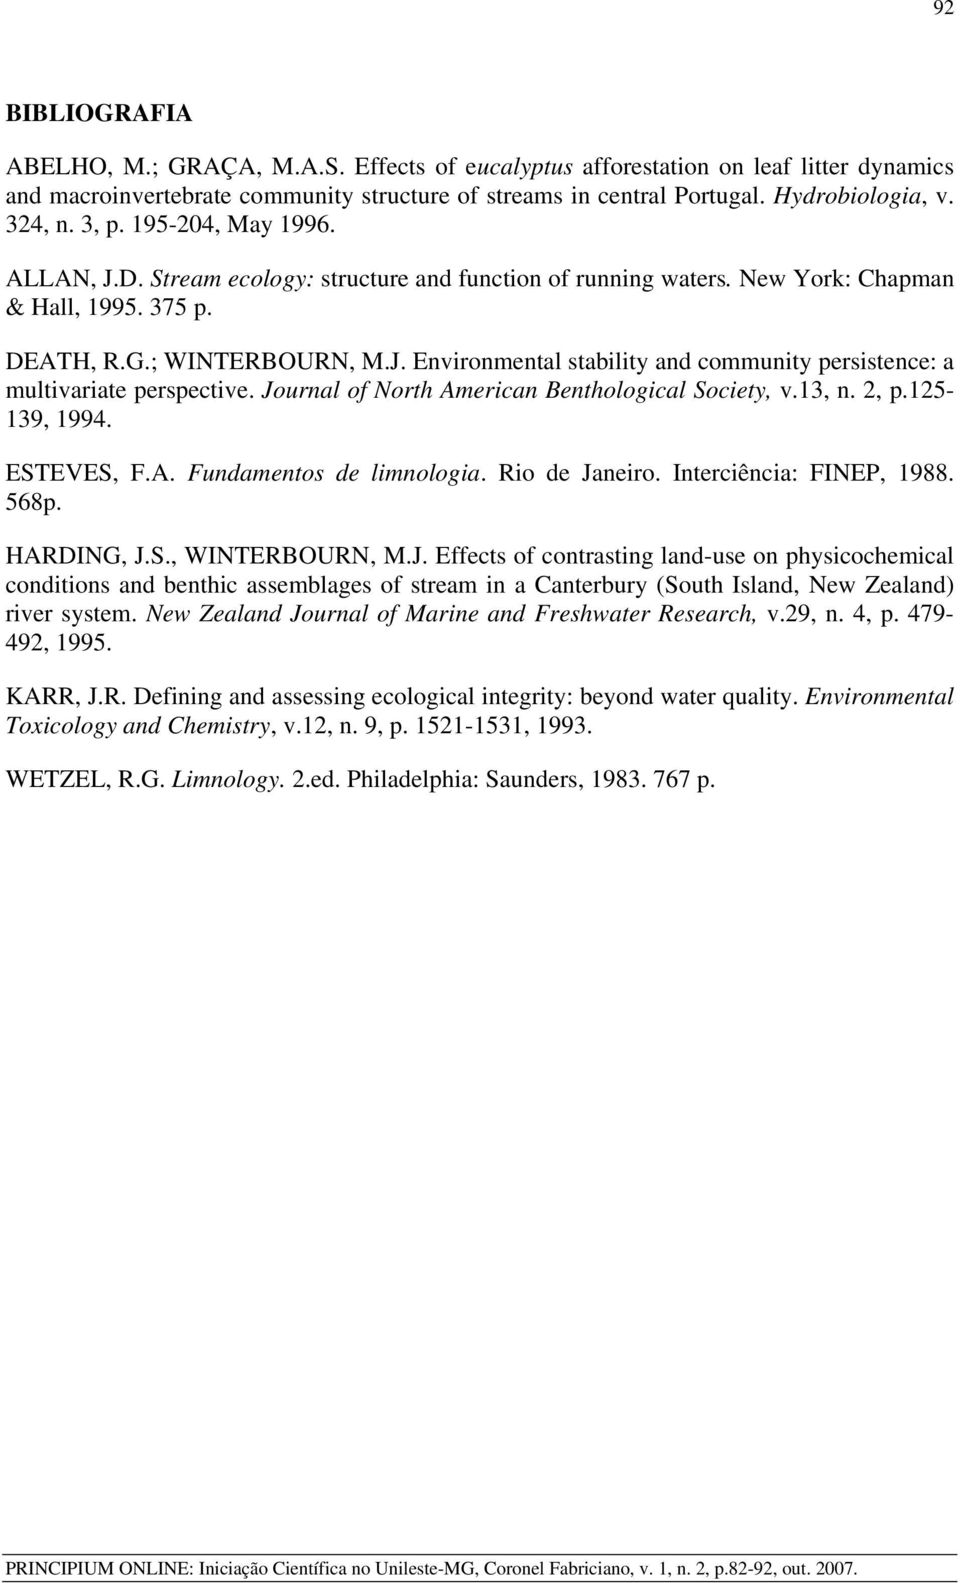 Journal of North American Benthological Society, v.13, n. 2, p.125-139, 1994. ESTEVES, F.A. Fundamentos de limnologia. Rio de Janeiro. Interciência: FINEP, 1988. 568p. HARDING, J.S., WINTERBOURN, M.J. Effects of contrasting land-use on physicochemical conditions and benthic assemblages of stream in a Canterbury (South Island, New Zealand) river system.